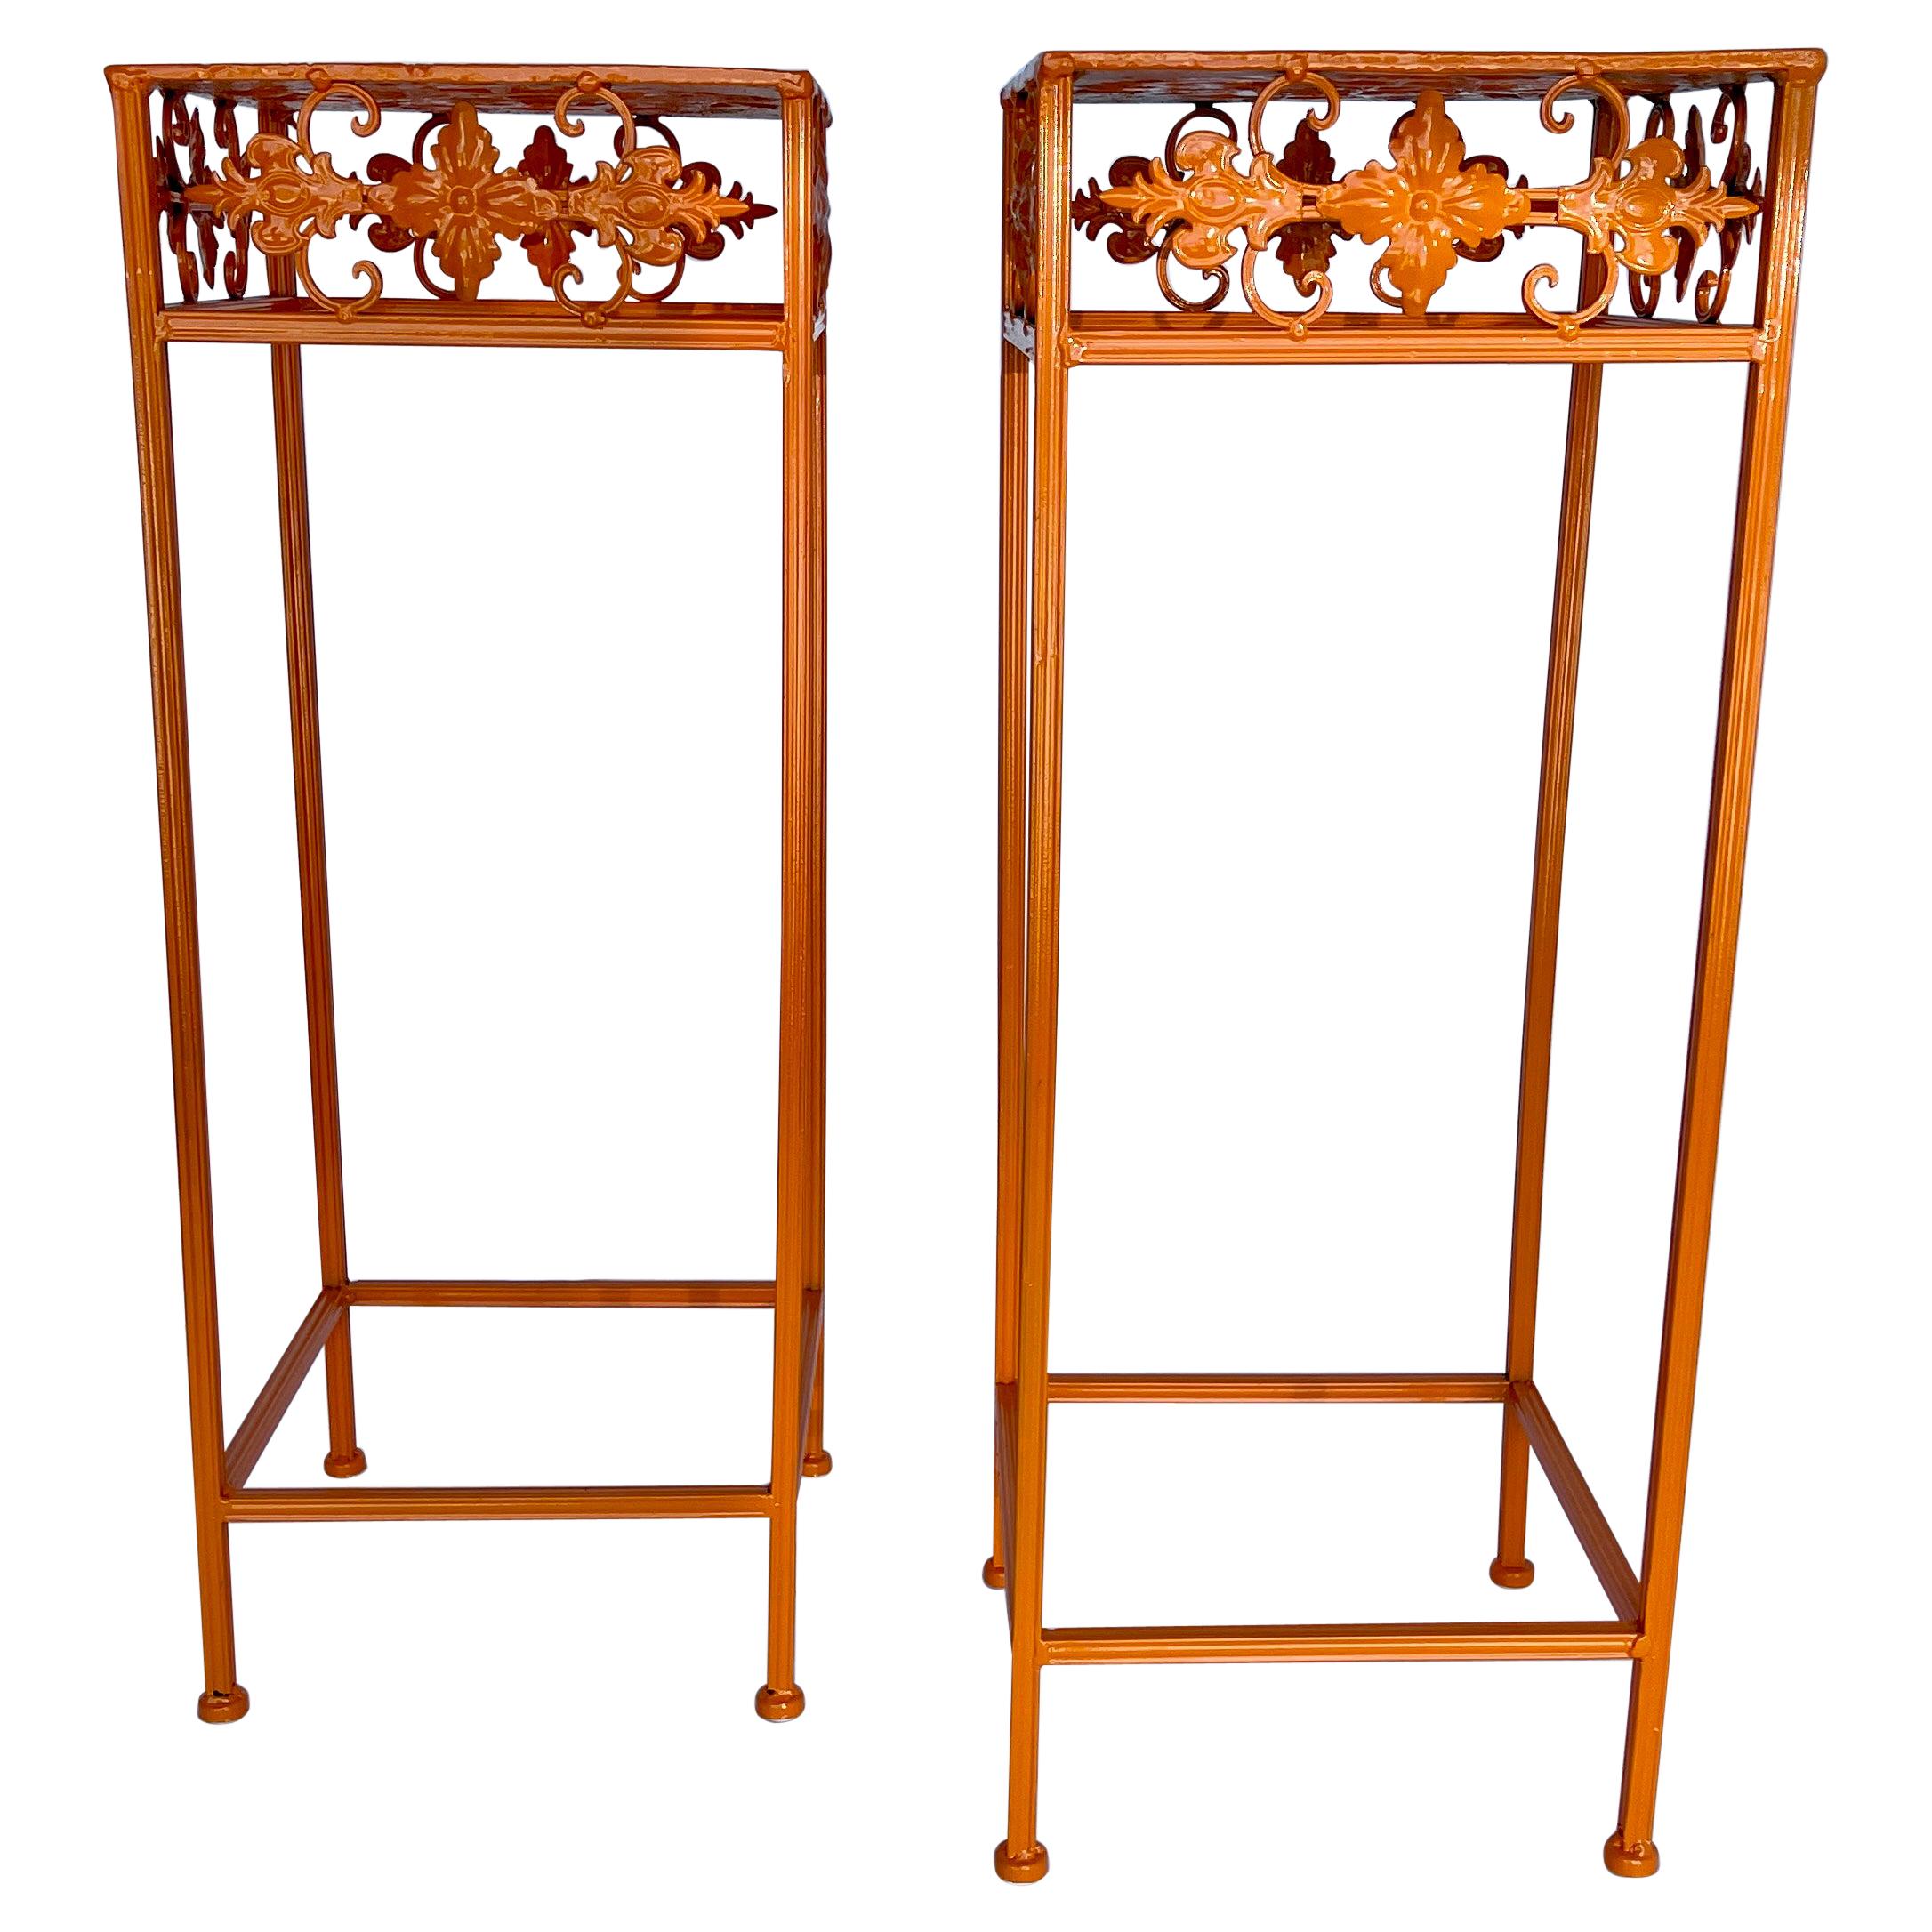 Pair of Plant Stands, Powder-Coated Orange